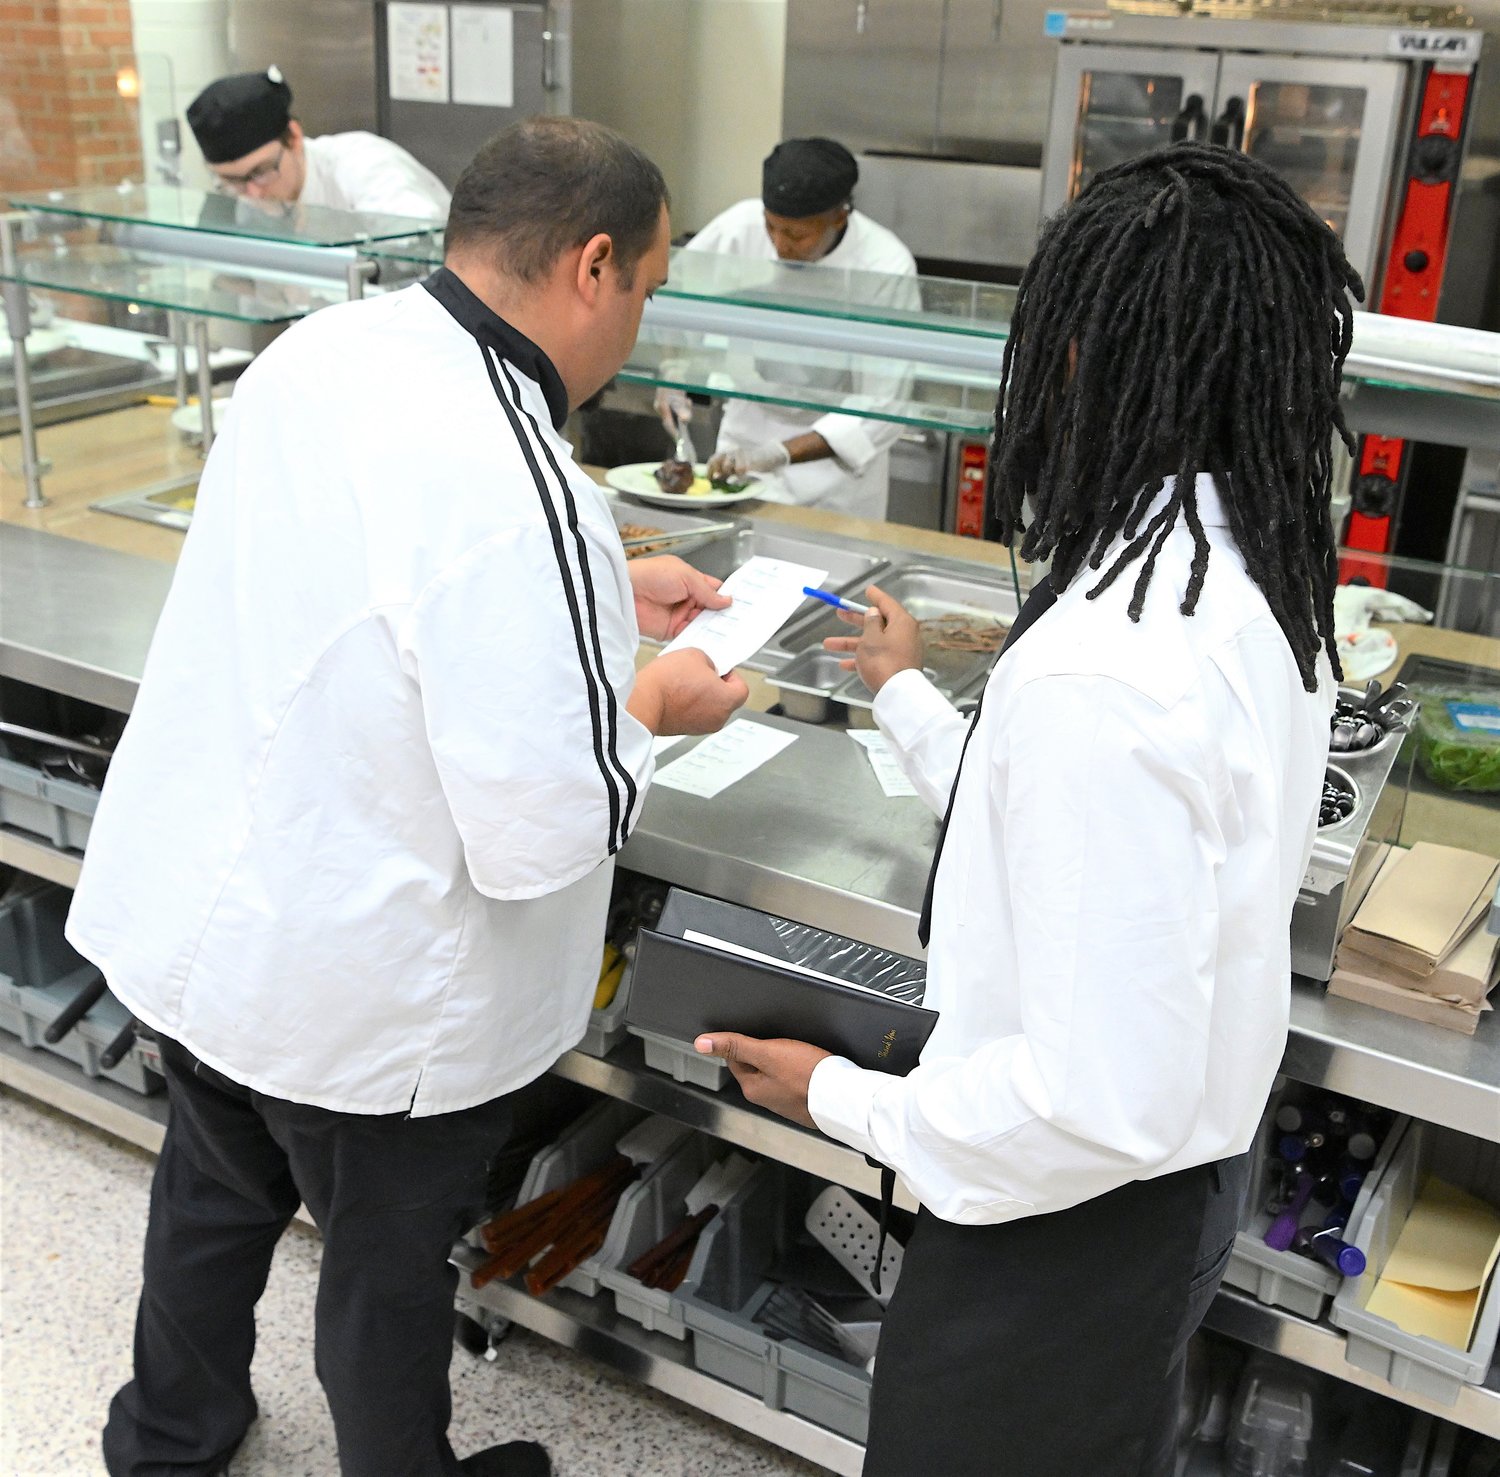 A student checks a meal order during the dinner prepared by FTCC students.